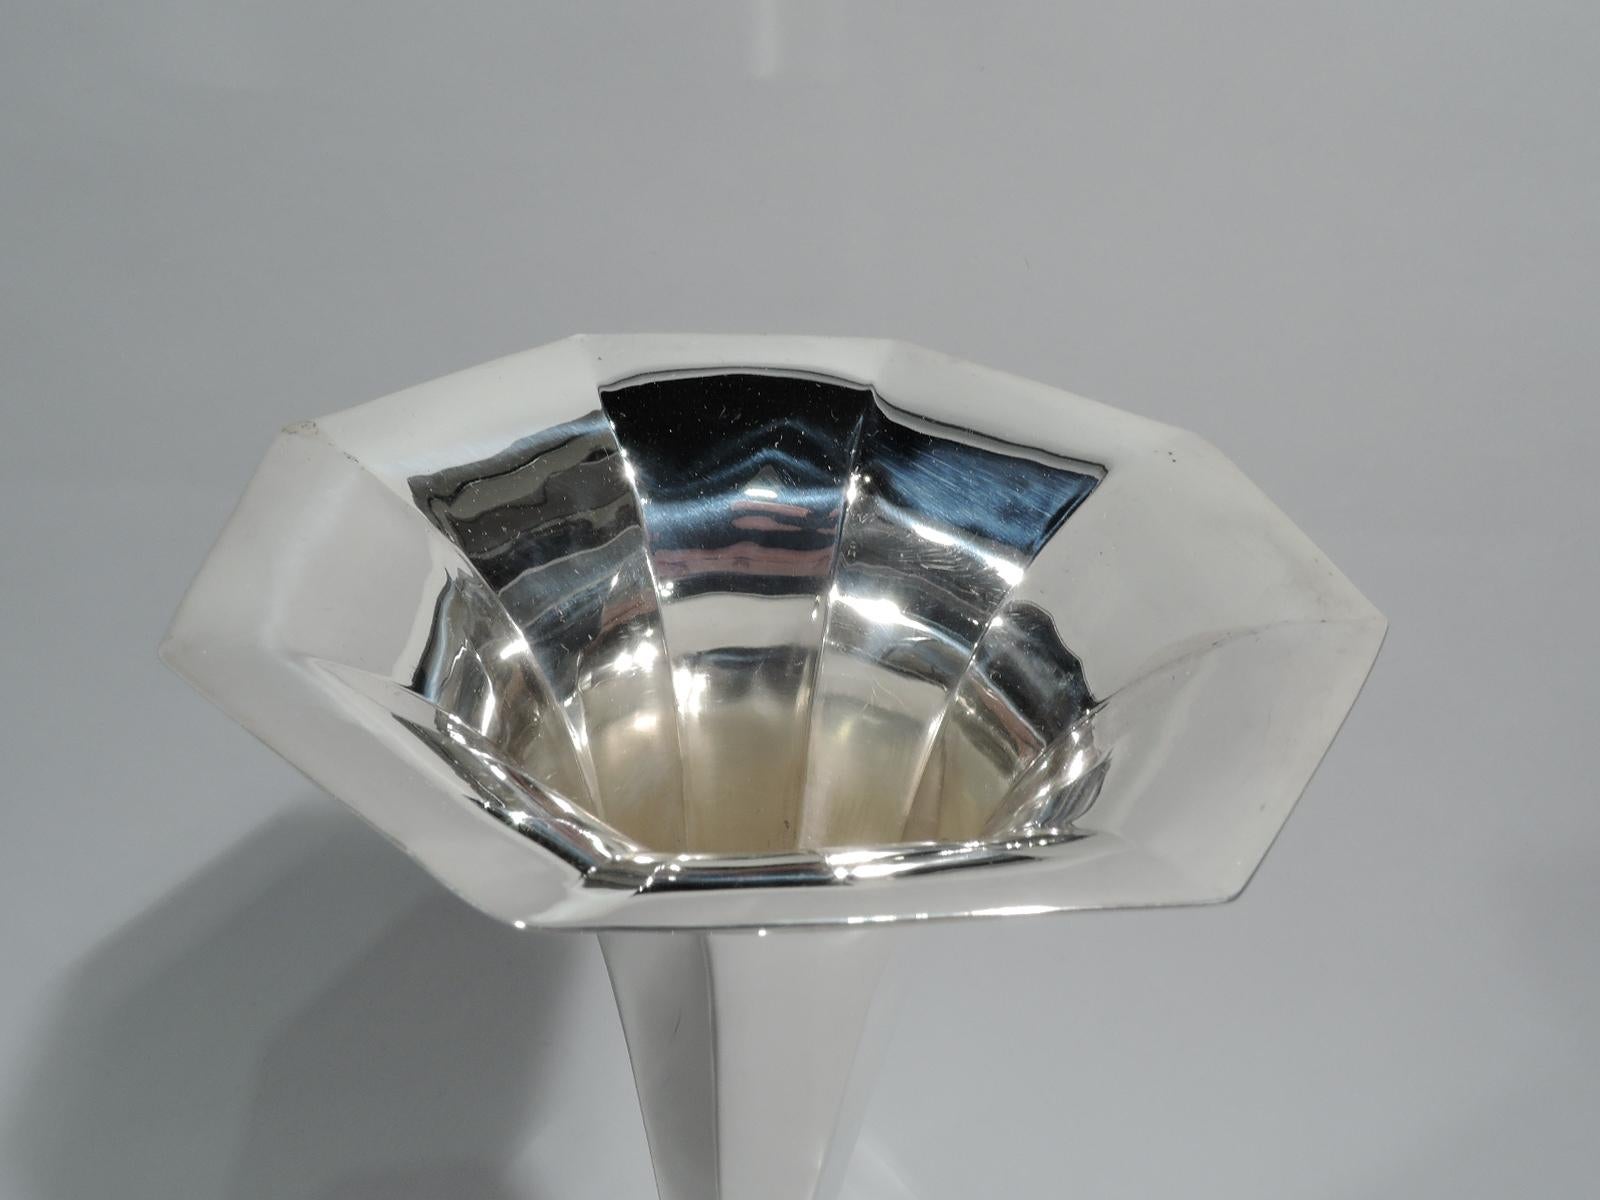 Art Deco sterling silver vase. Made by Tiffany & Co. in New York, ca 1912. Faceted cone with flared mouth and raised octagonal vase. Fully marked including maker’s stamp, pattern no. 18376 (first produced in 1912), and director’s letter m. Weighted.